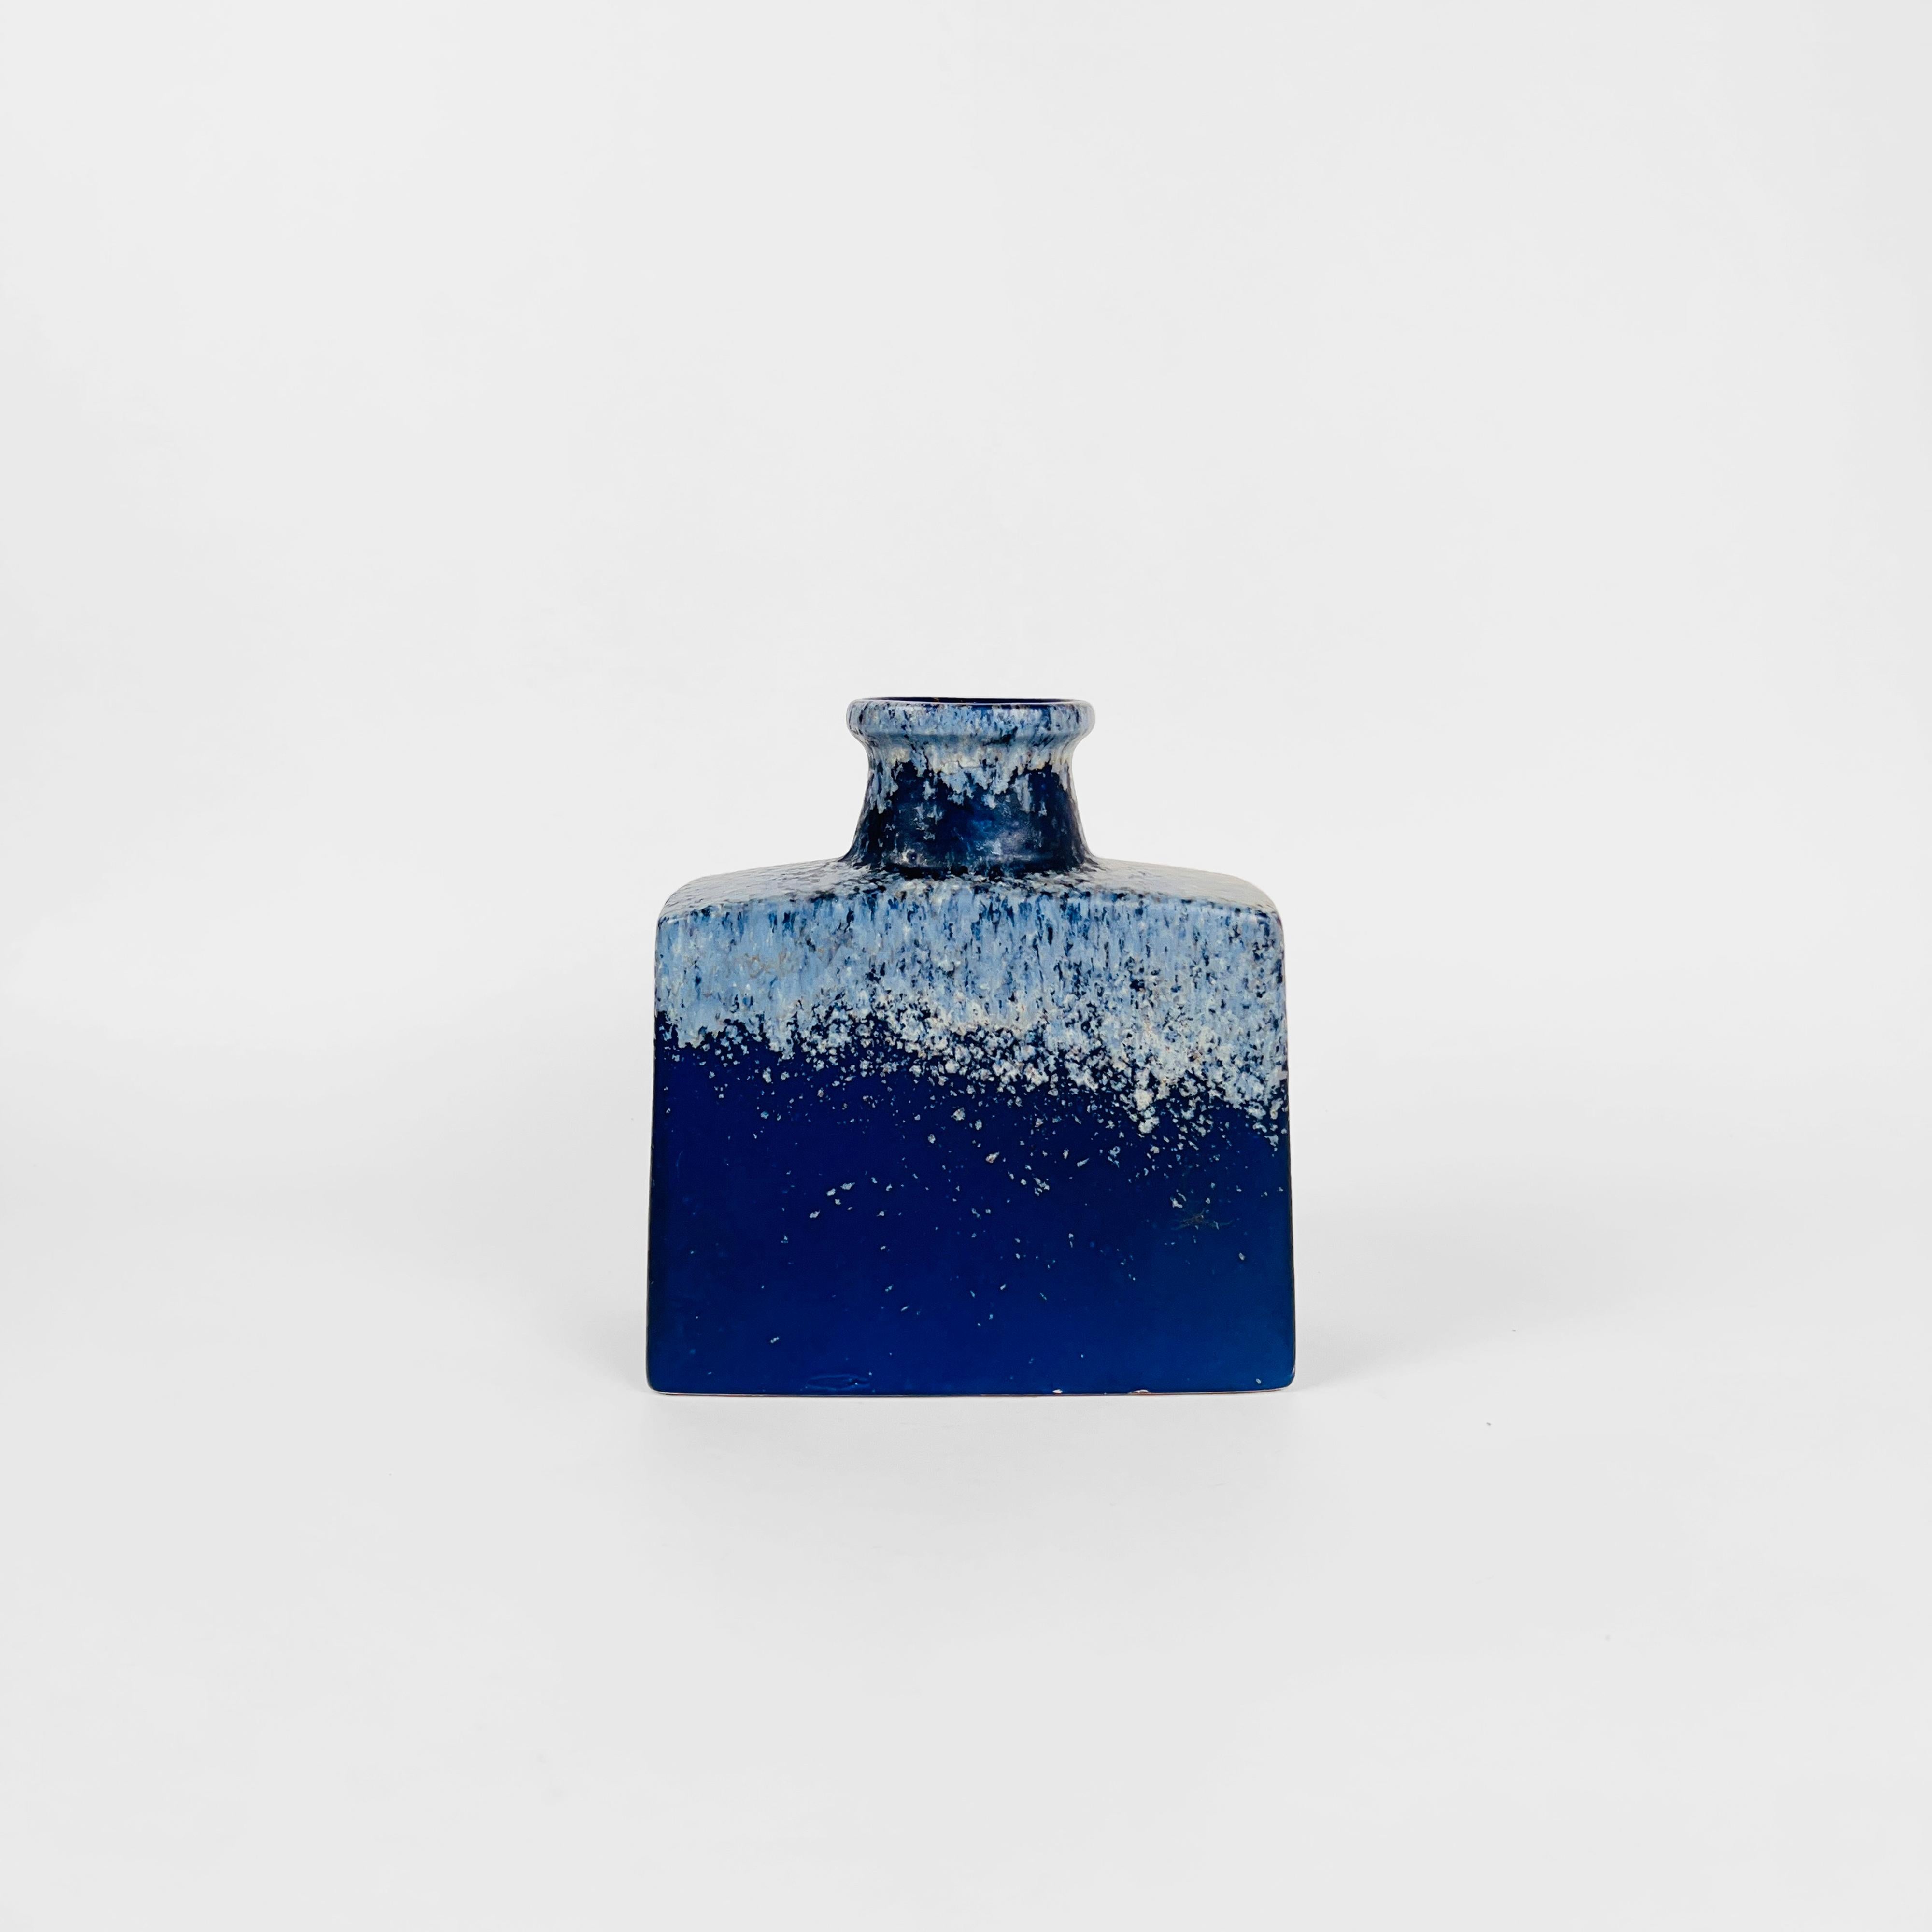 Rare shape fat lava studio vase. Finished in smooth Klein blue glaze with off white texture on the top part. Stamped 281-19 West Germany on the bottom.